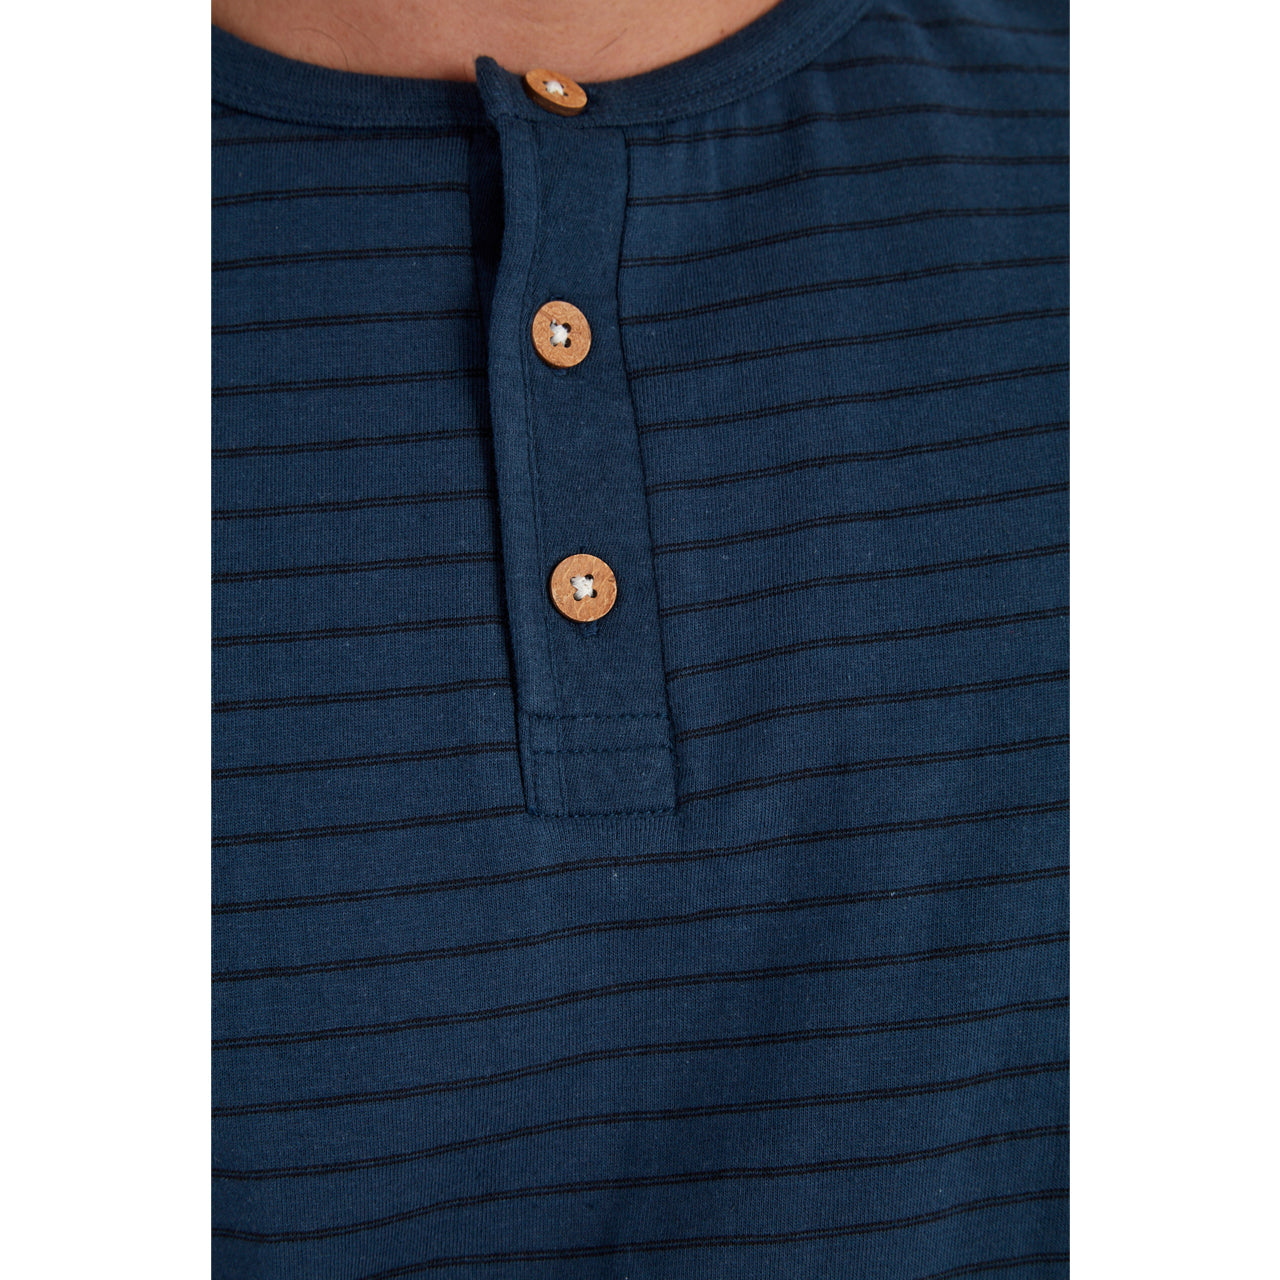 Short Sleeve Blue Striped Henley front view of collar